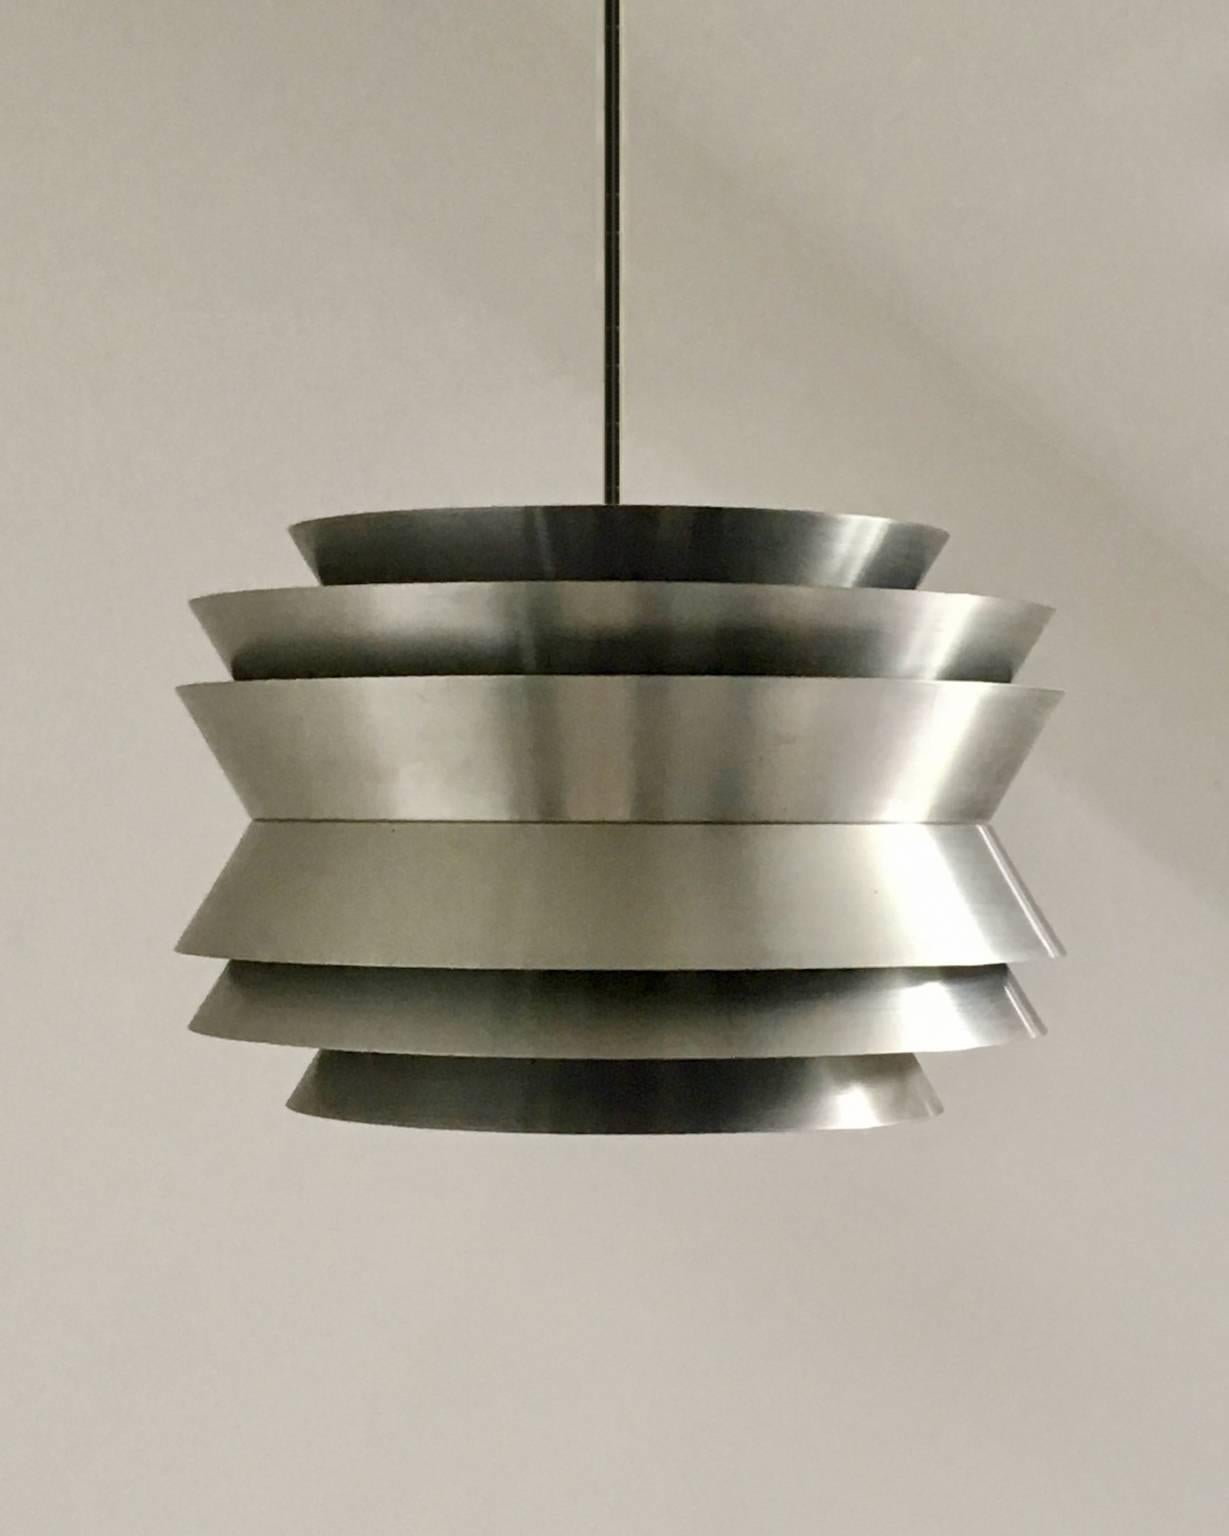 *** Late Summer Sale - ends 30 August.  Please contact us if you would like details of availability of this item. ***

Trava pendant light by Carl Thore for Granhaga, Sweden, 1960s.

A multi-layered pendant light in spun aluminium with purple inner